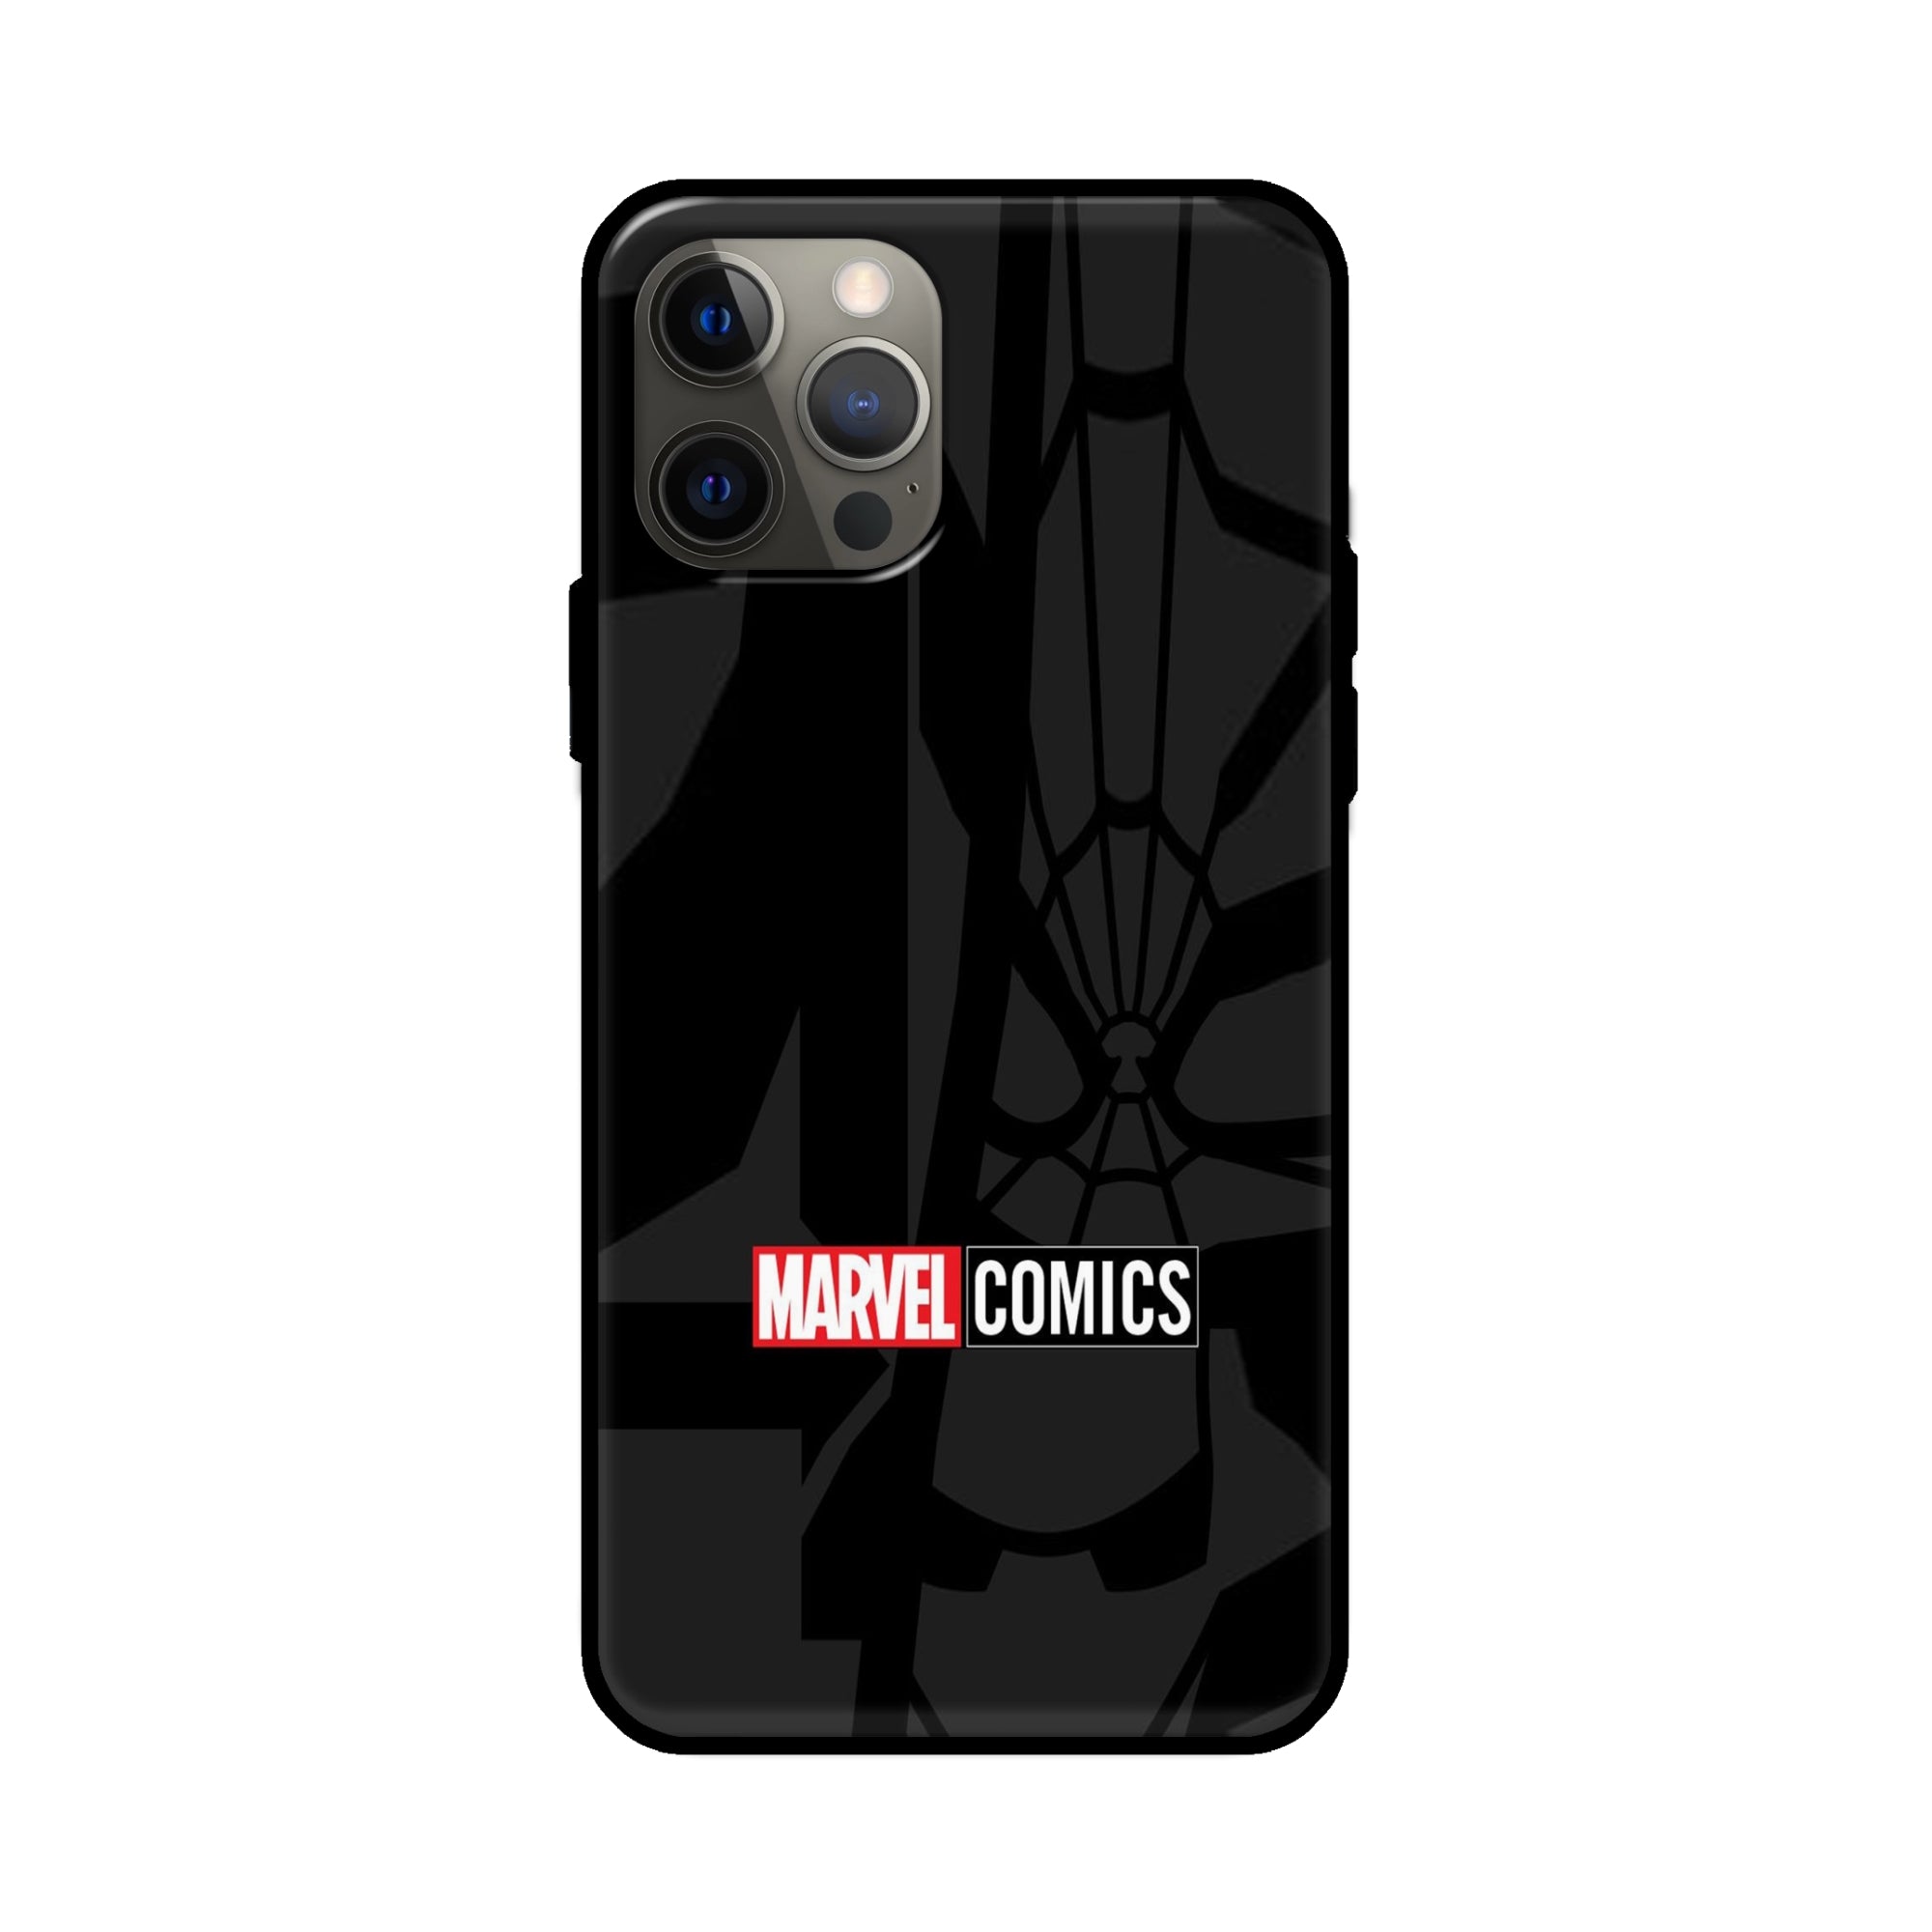 Buy Marvel Comics Glass/Metal Back Mobile Phone Case/Cover For Apple iPhone 12 pro max Online